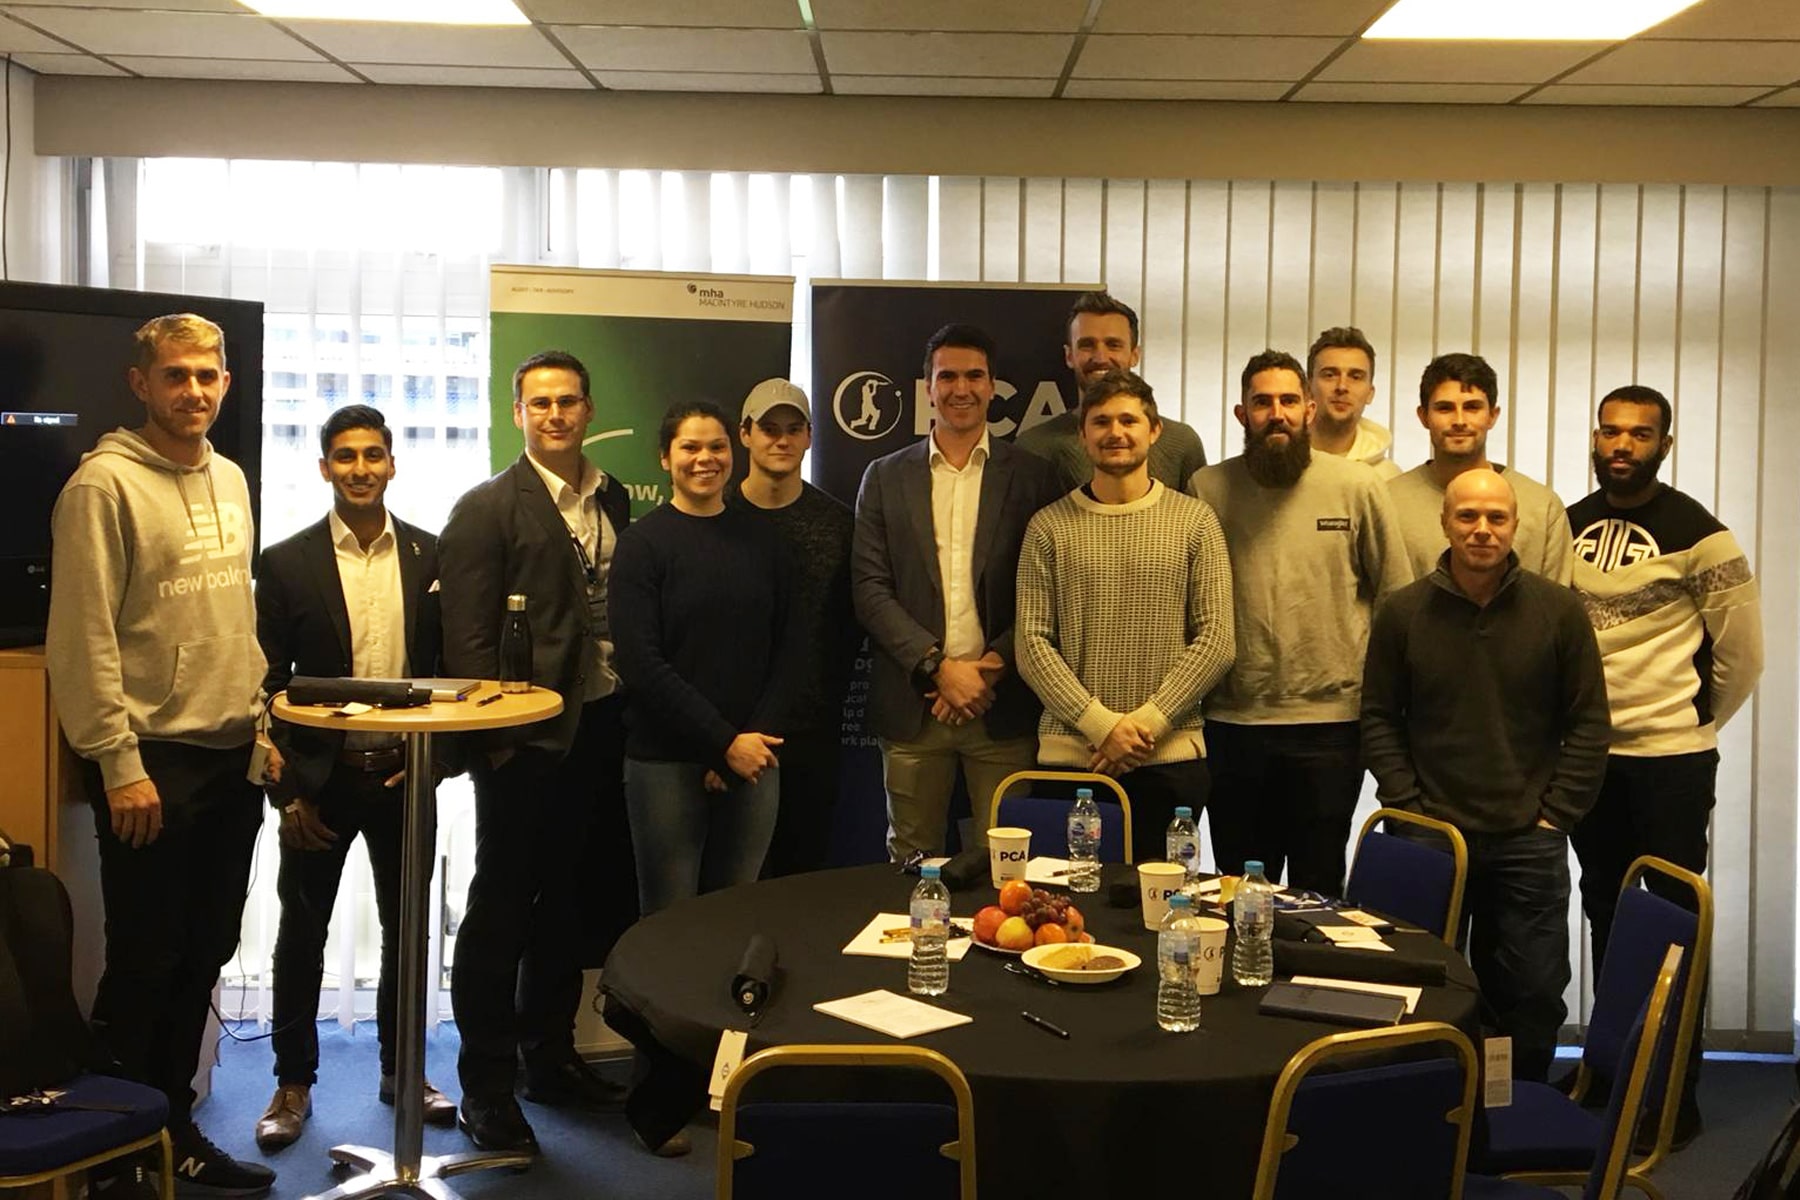 Members attend ‘Mind your business’ seminar